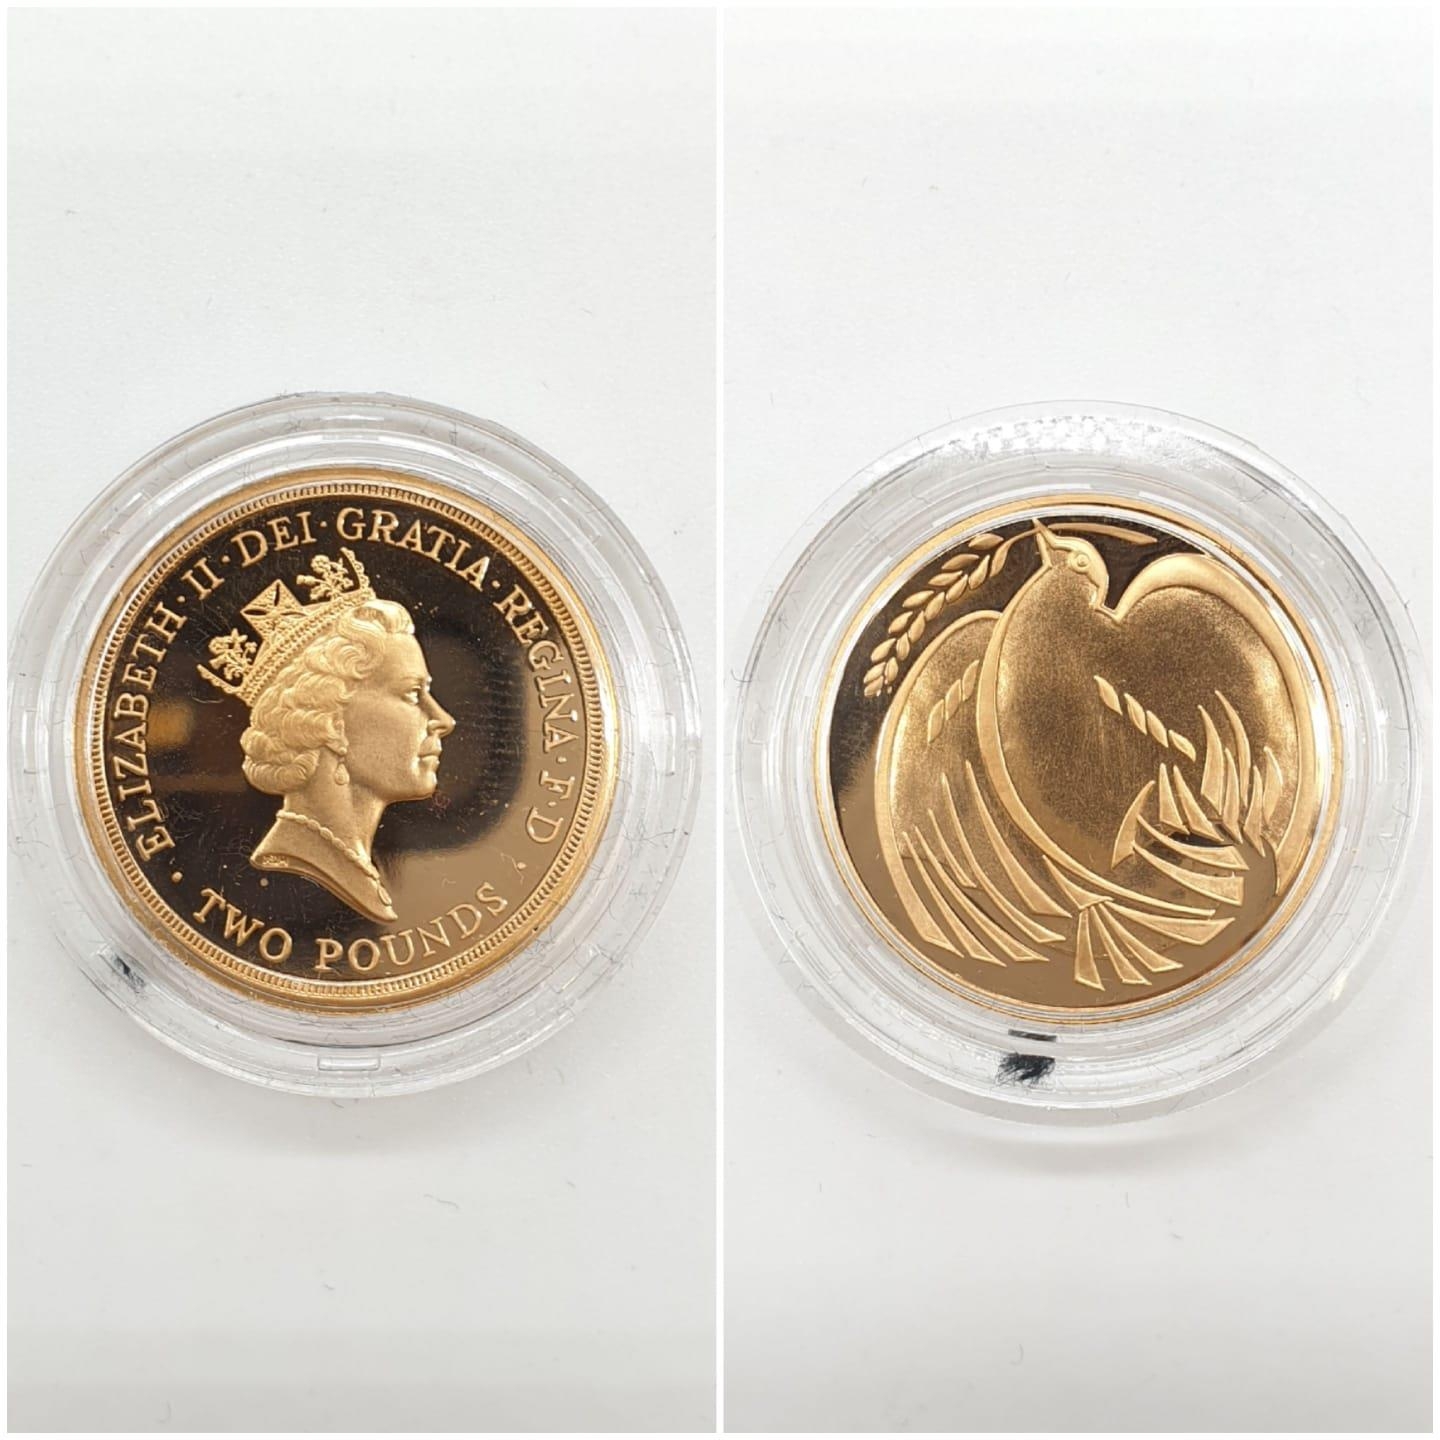 1995 UK GOLD PROOF £2 COIN, 22ct GOLD WEIGHT 15.98g, IN ORIGINAL BOX AND PAPER - Image 2 of 5